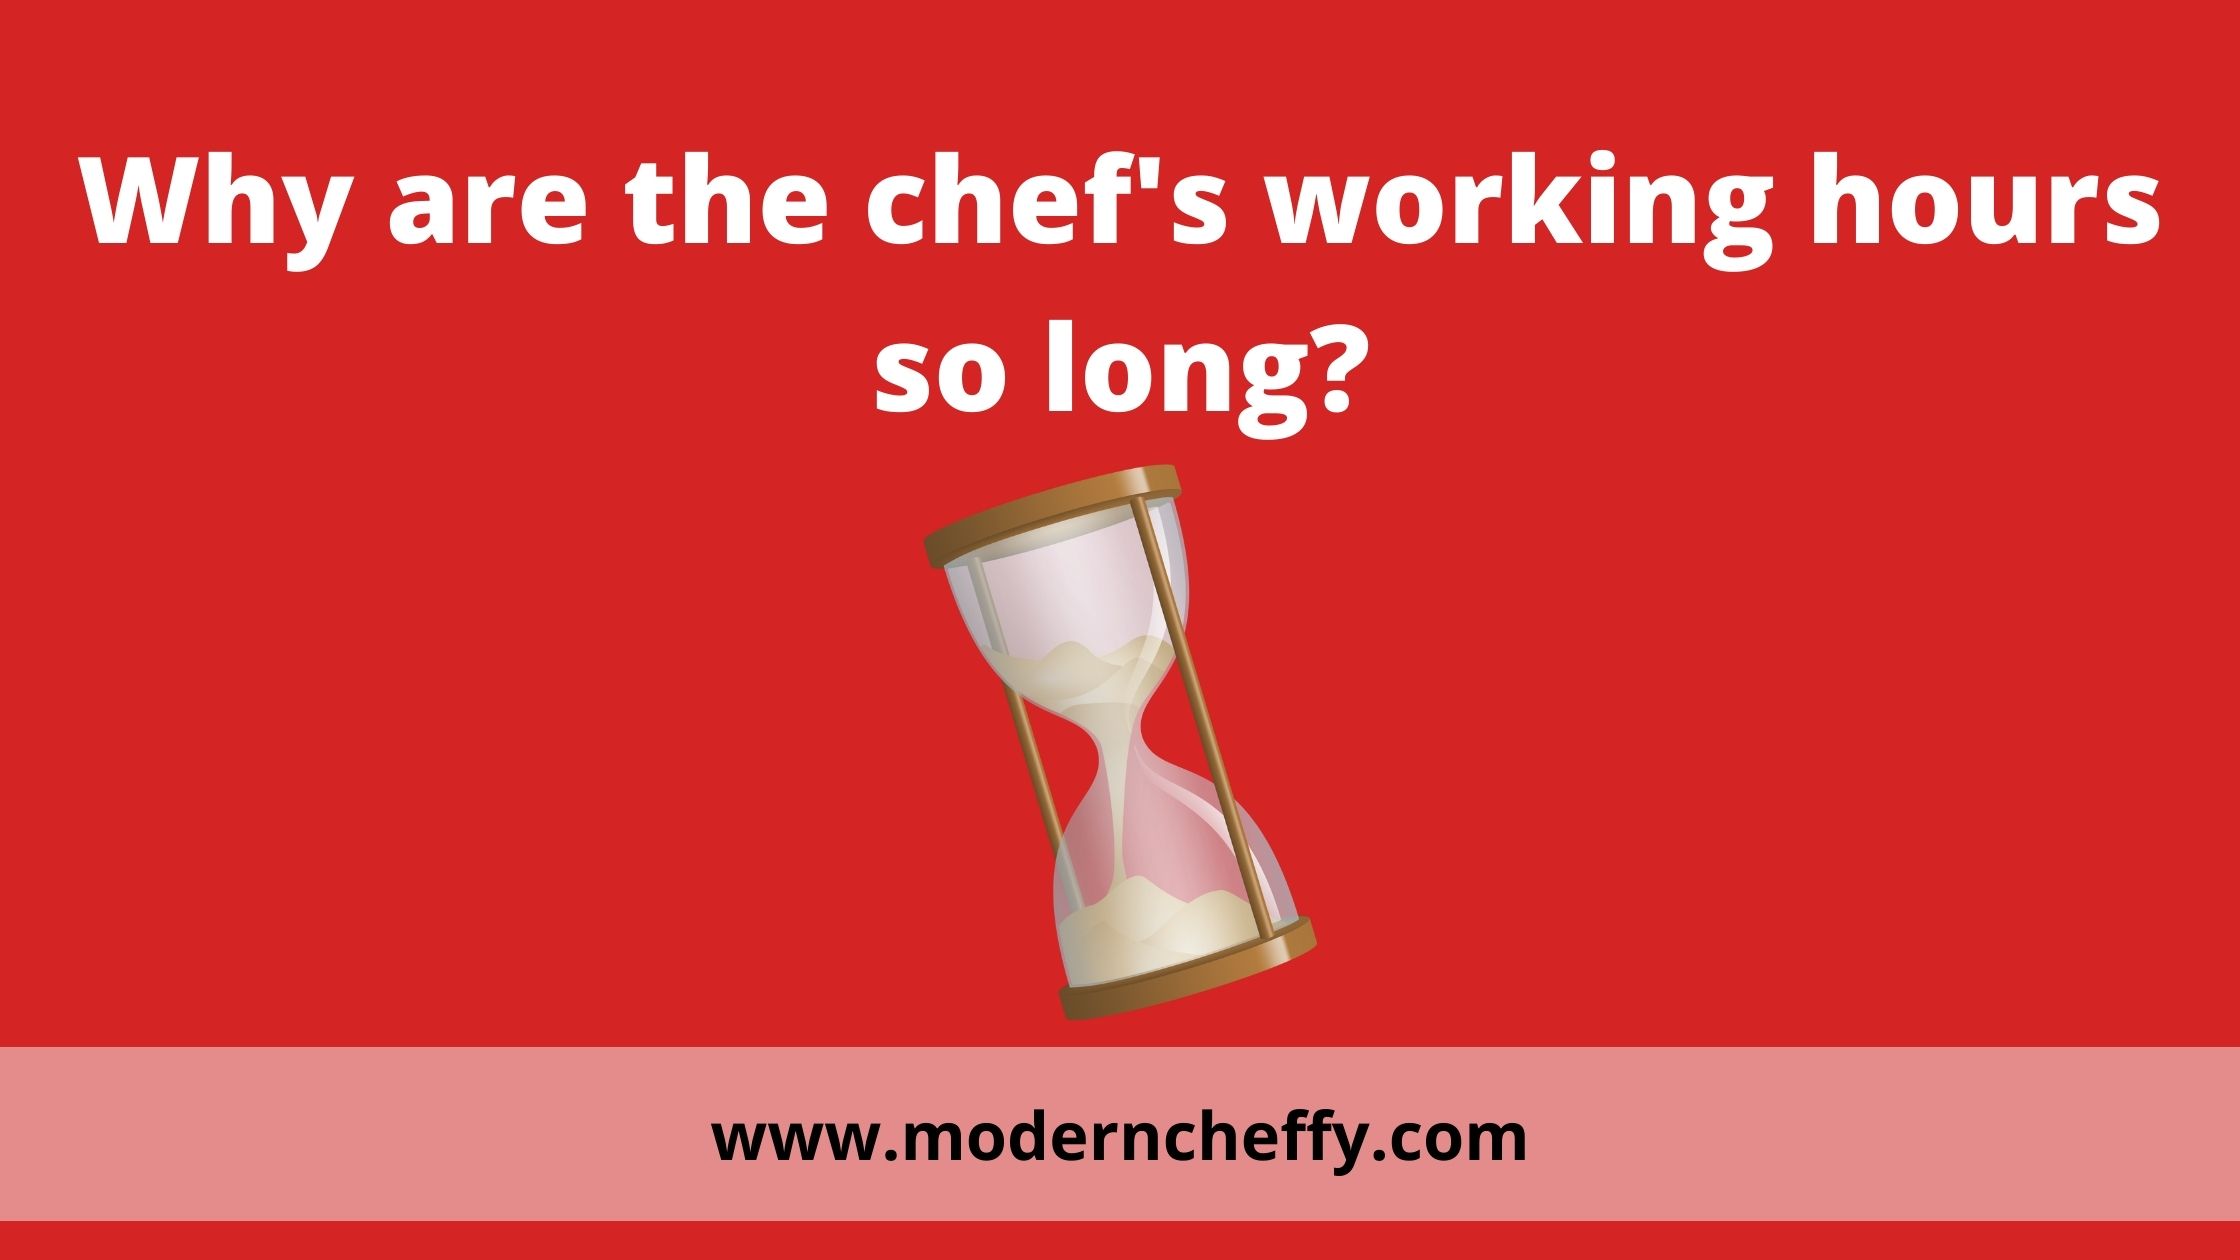 Why are the chef's working hours so long?